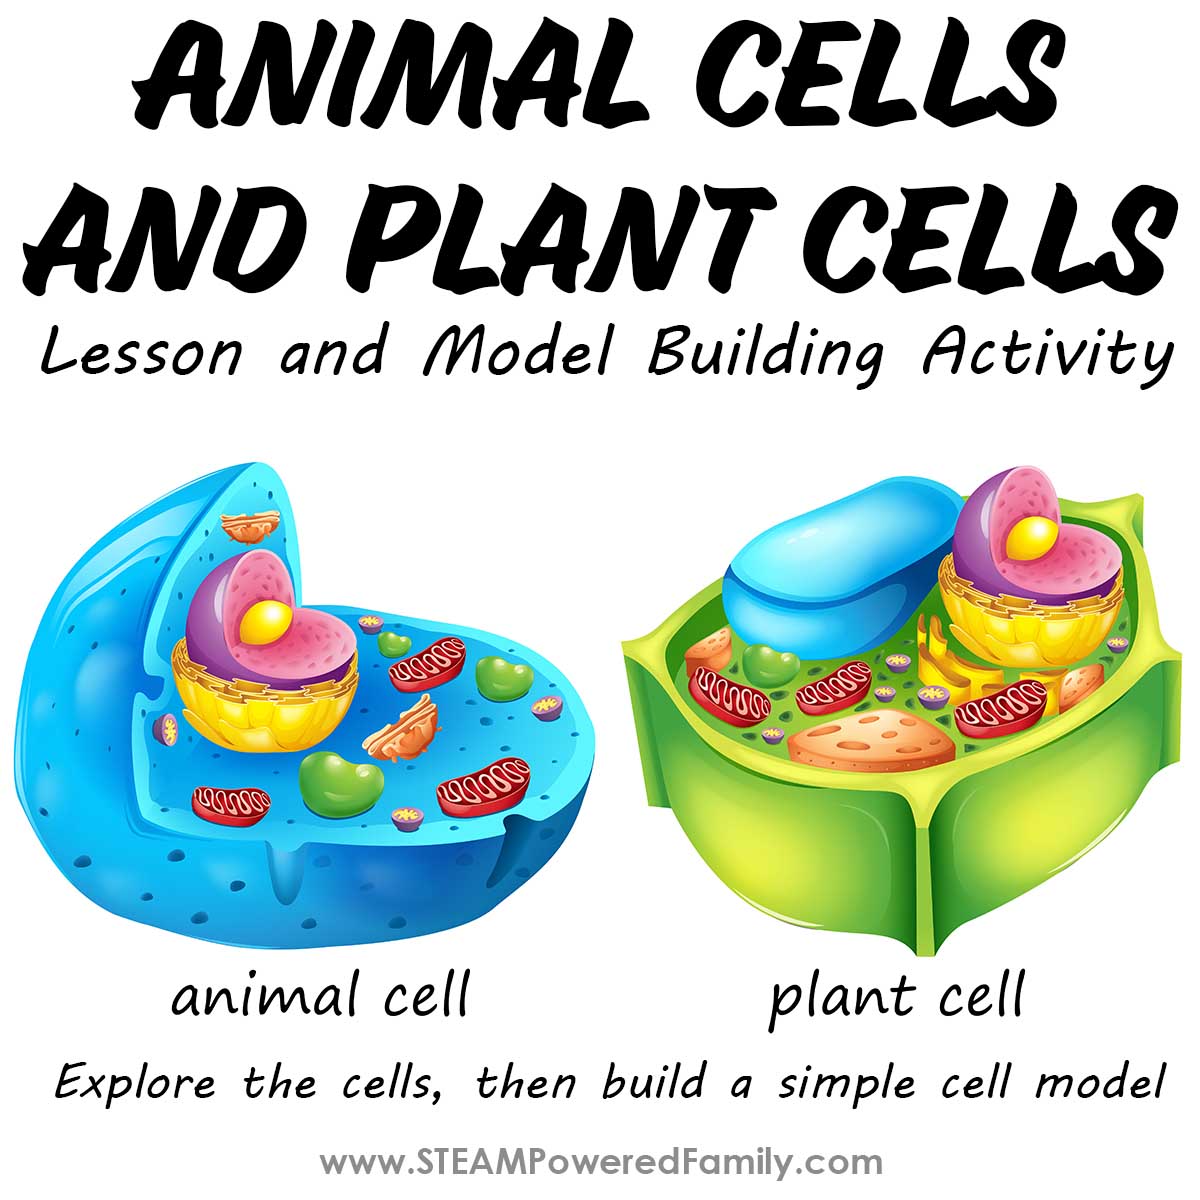 Build a Cell Model and Lesson